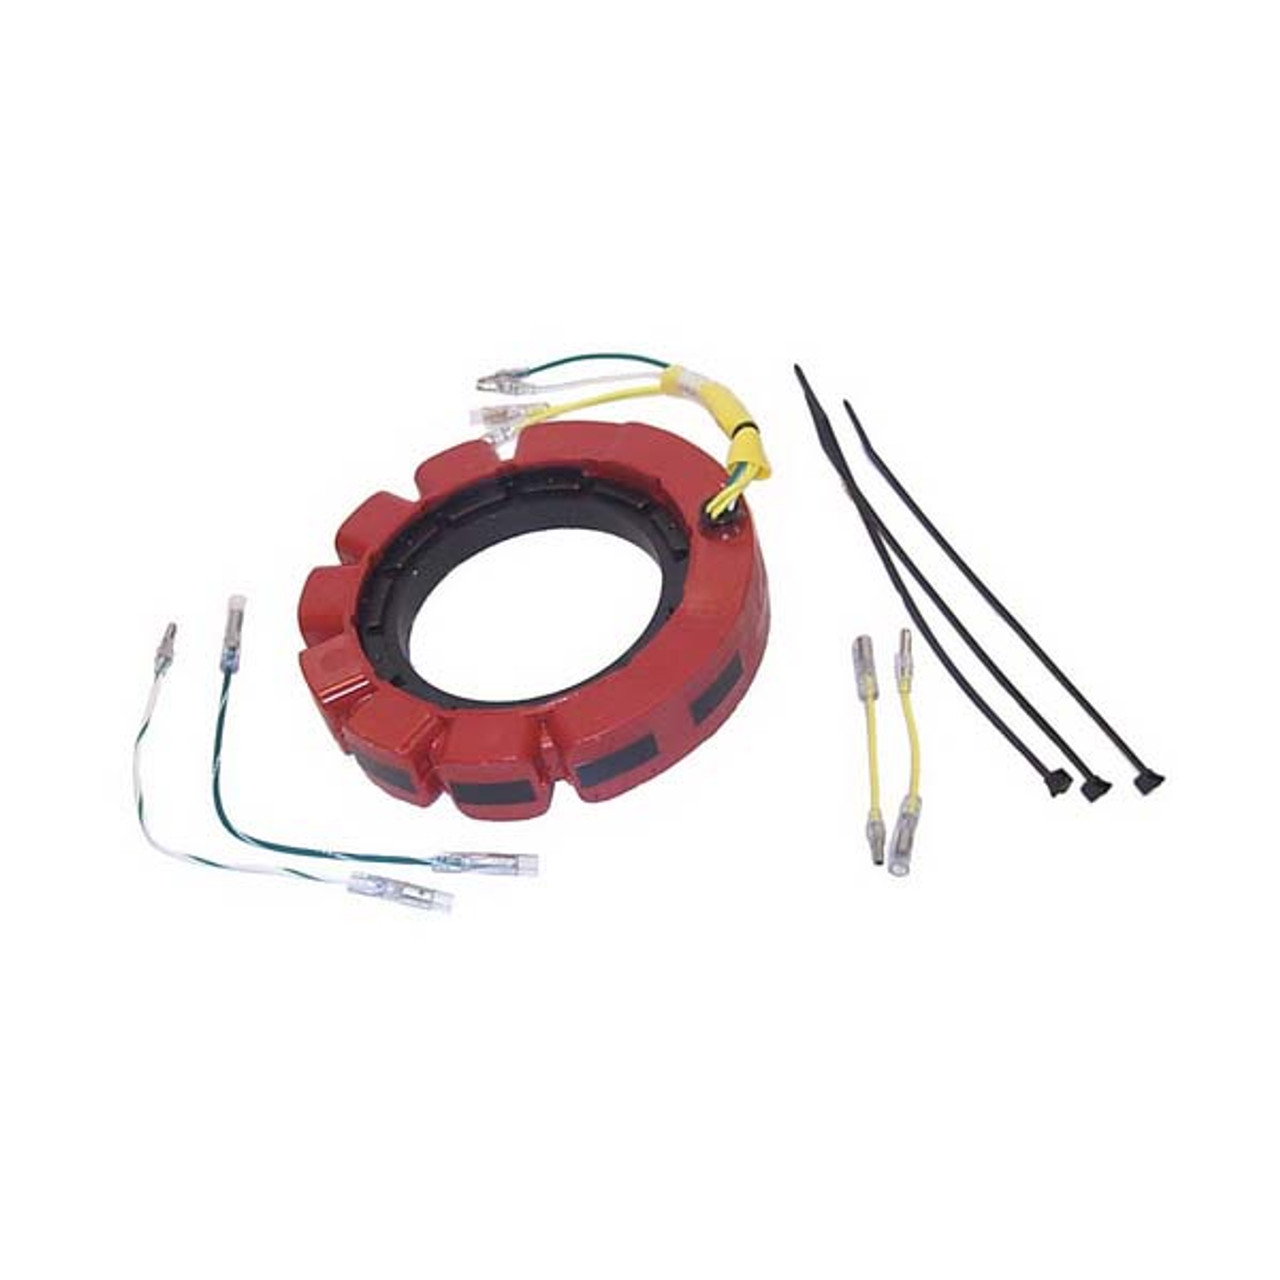 Sierra 18-5870 Stator Replaces 398-832075A21 Wholesale Marine